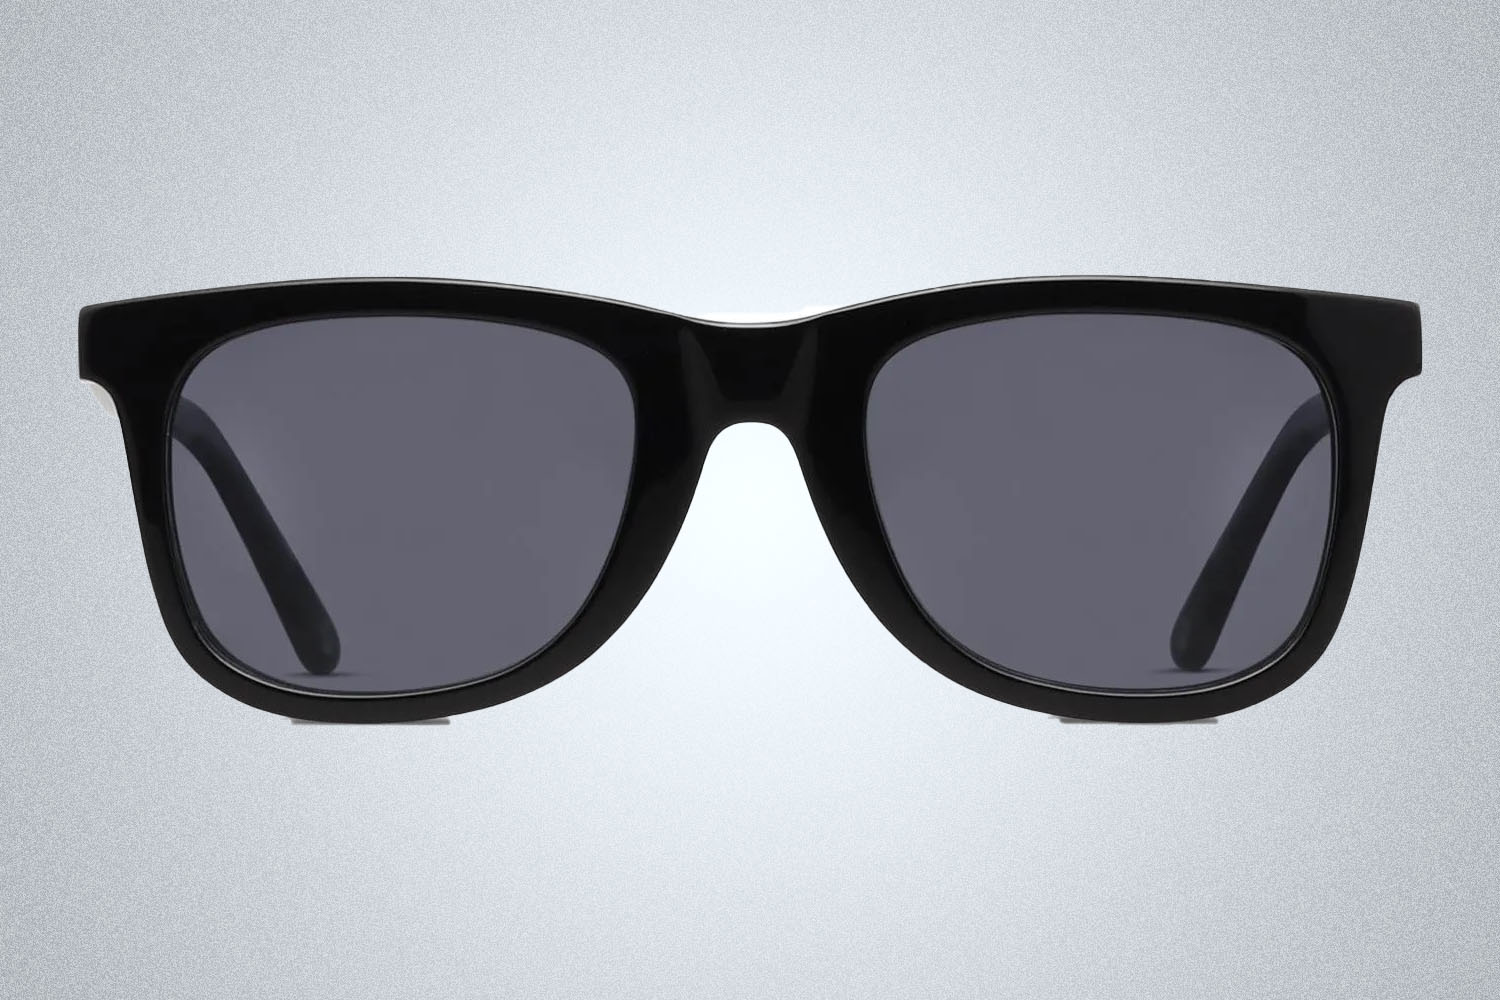 A pair of sunglasses from GlassesUSA on a grey background